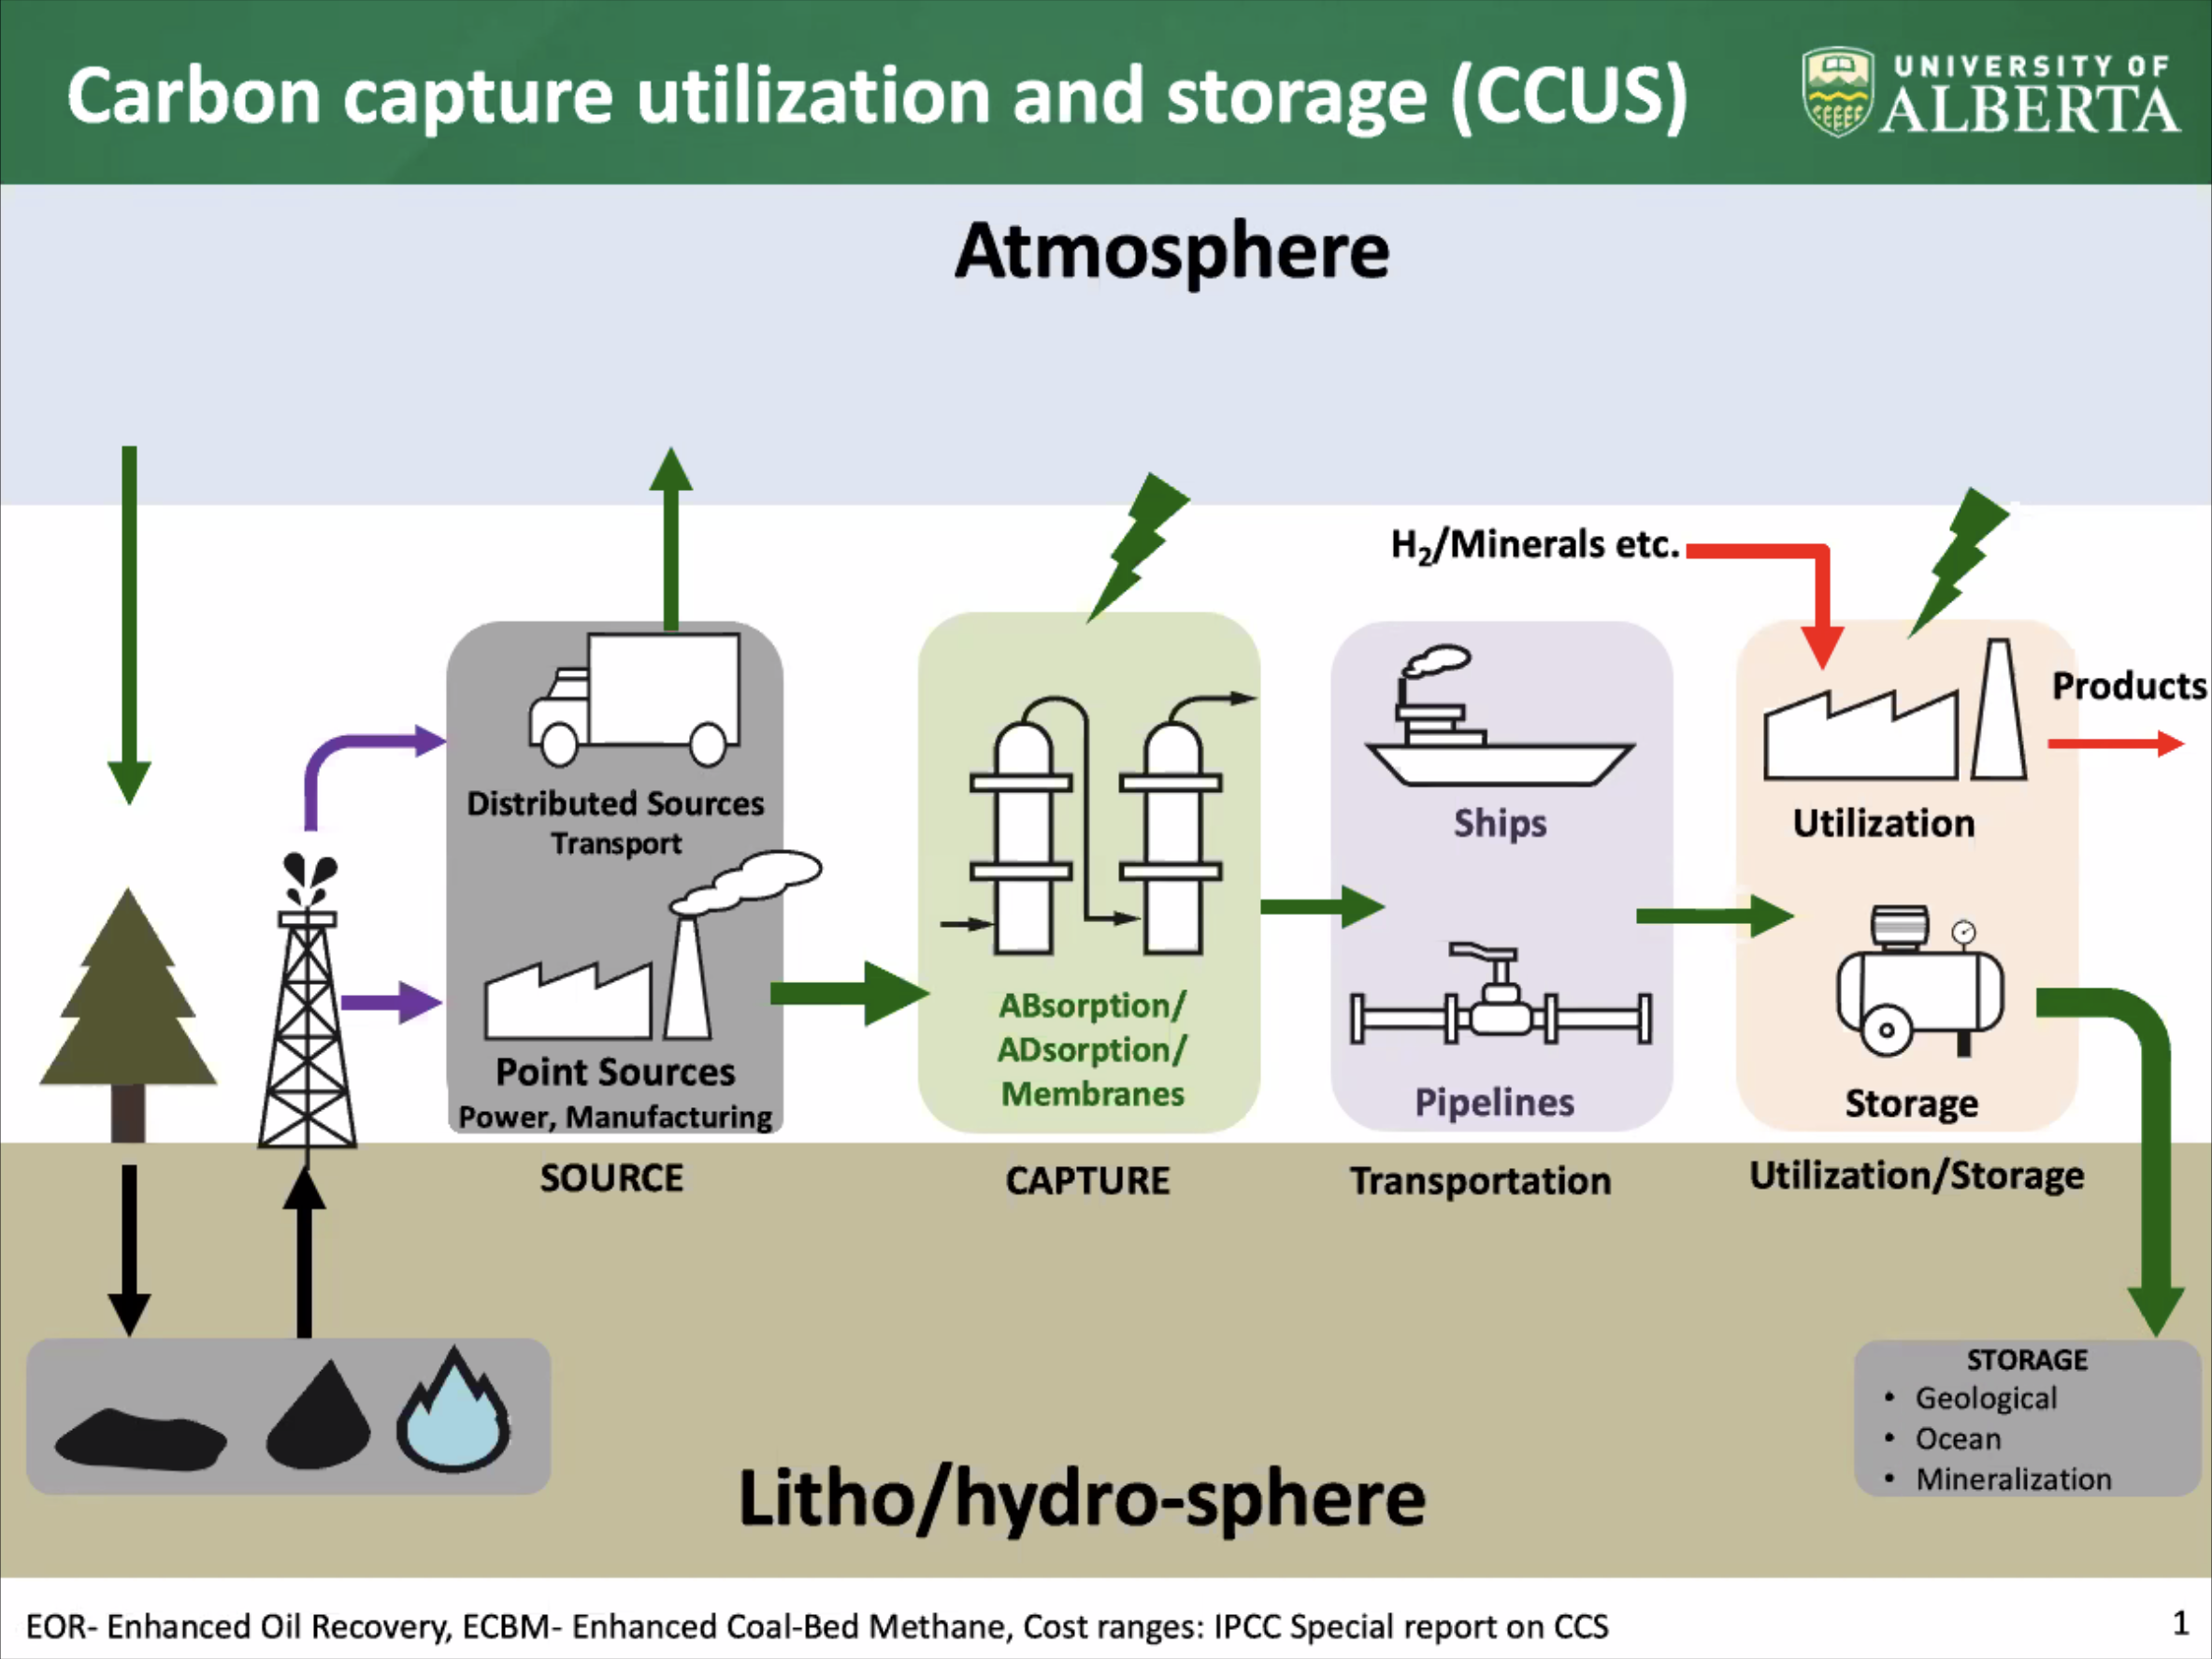 Arvind Rajendran's slide shows the overall system of carbon capture